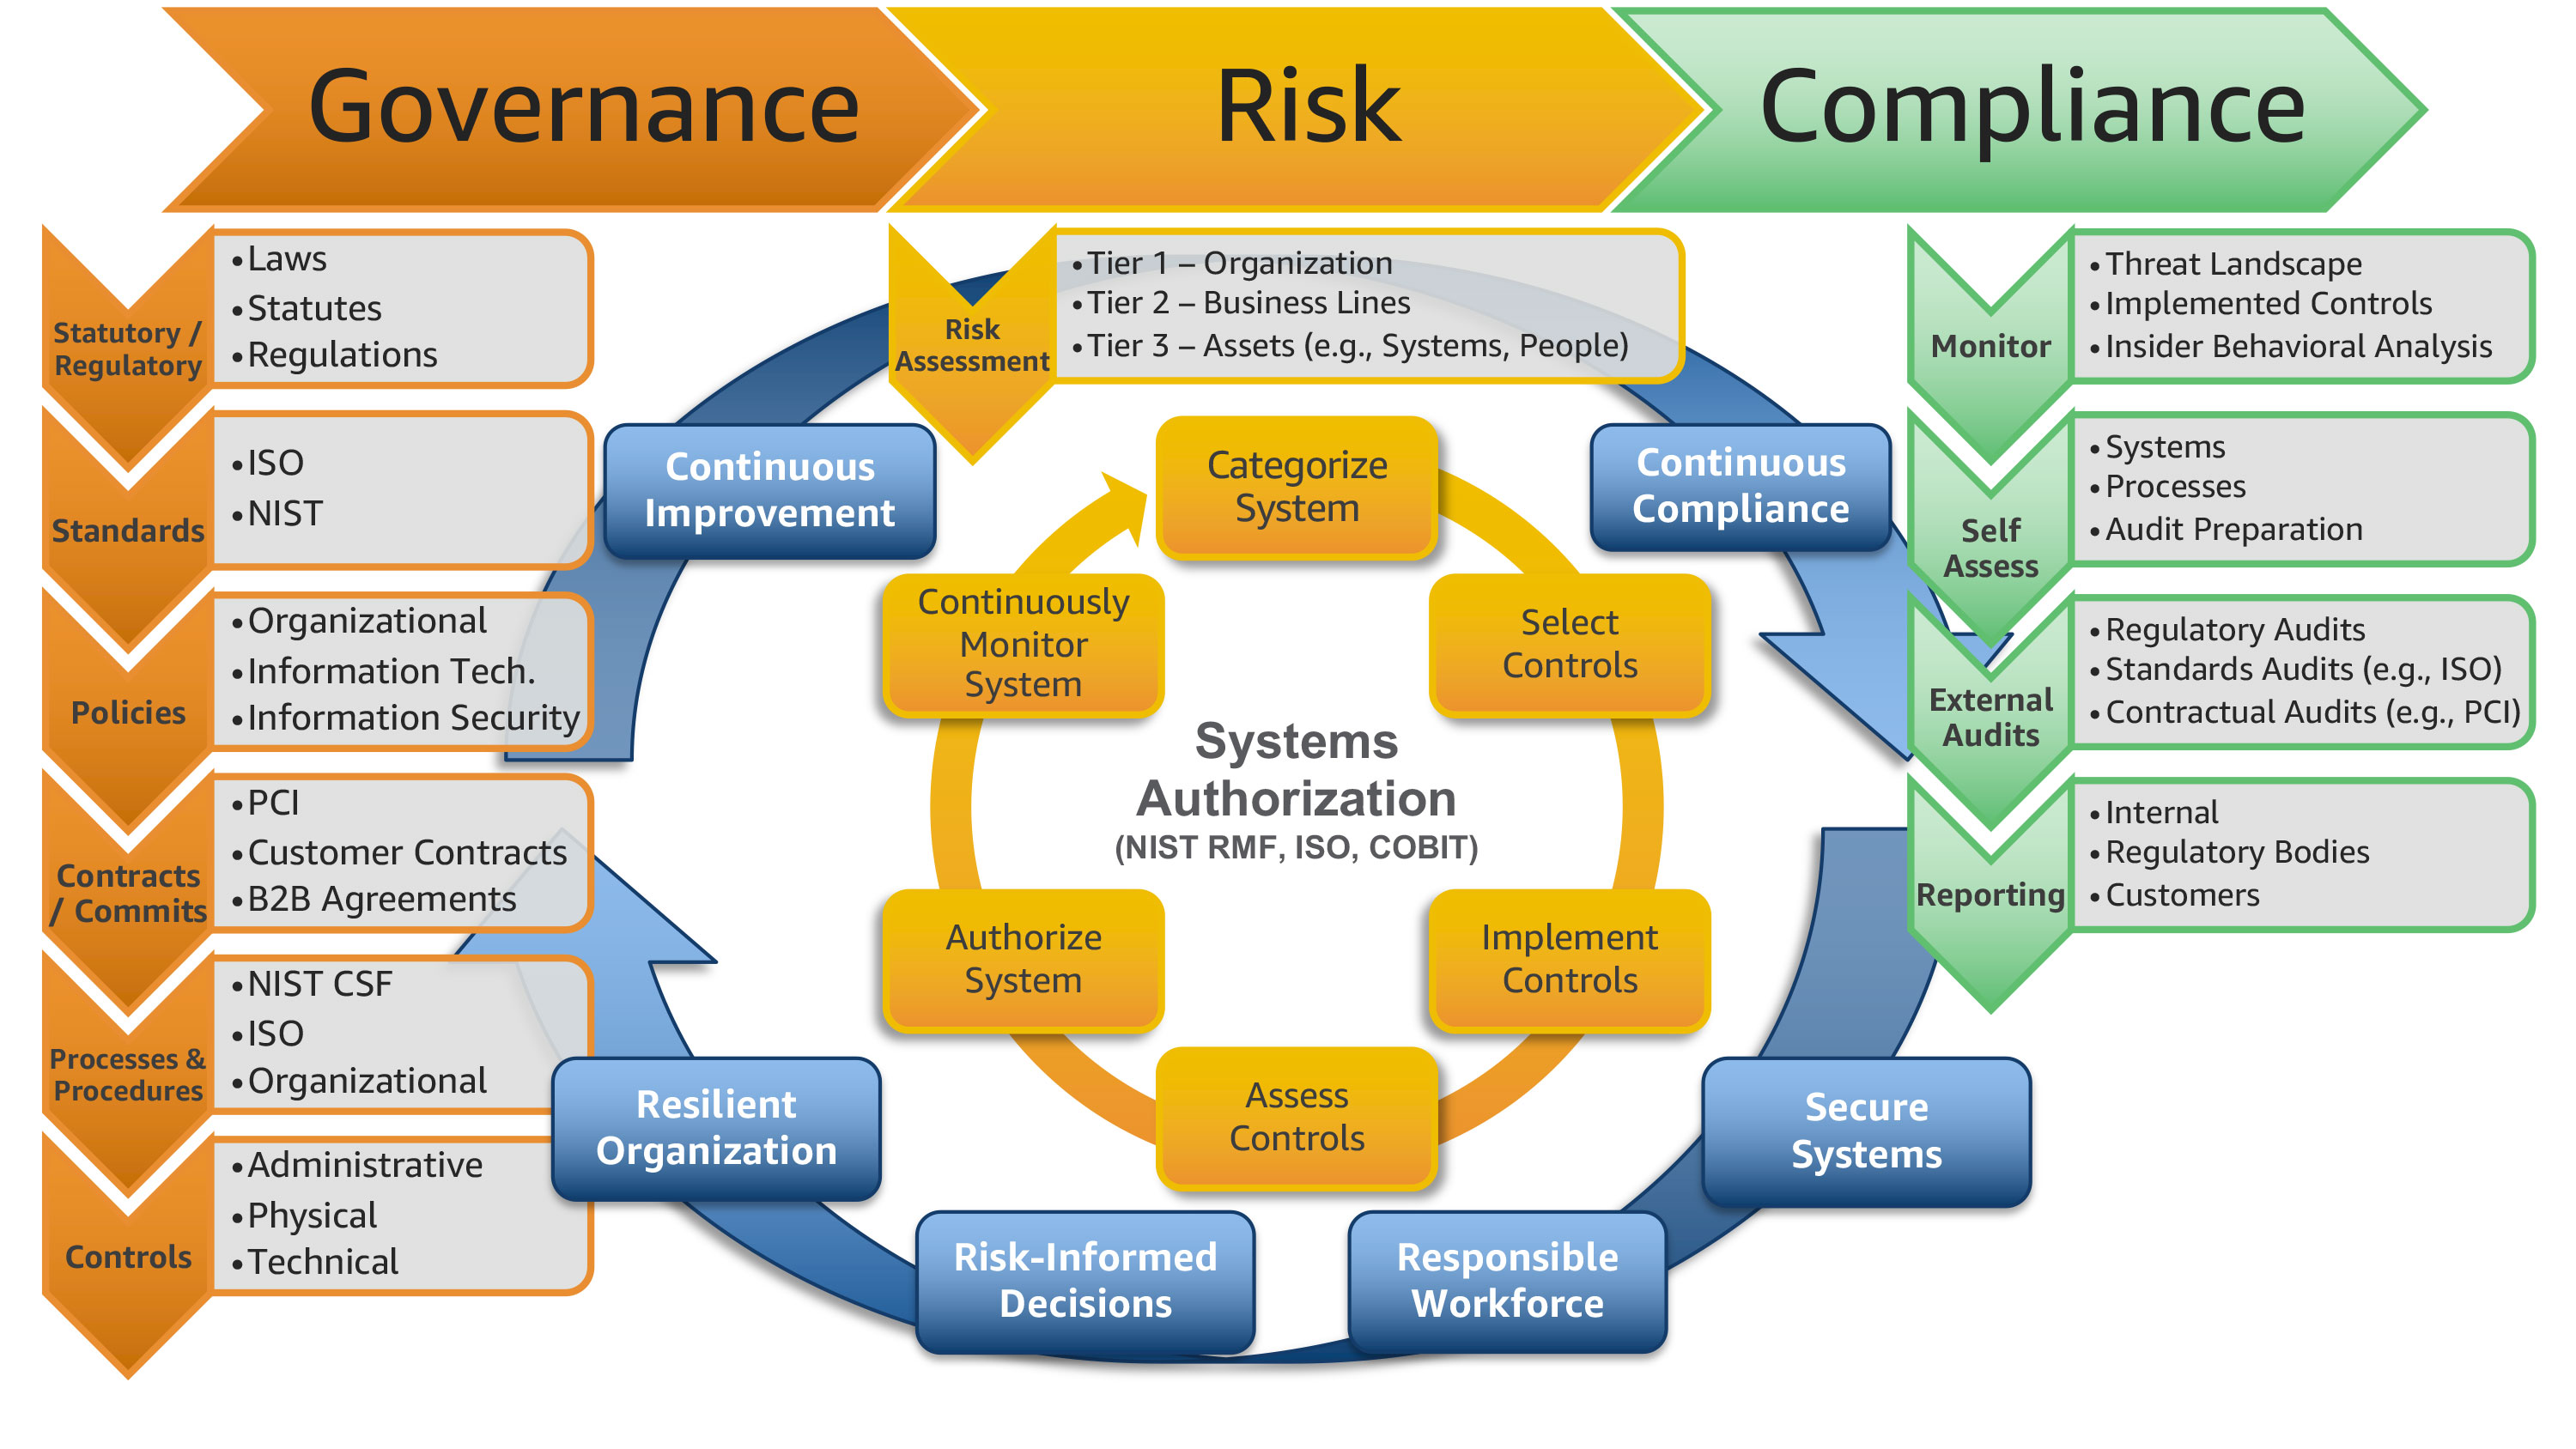  A diagram of a cloud governance framework with three main sections: Governance, Risk, and Compliance.